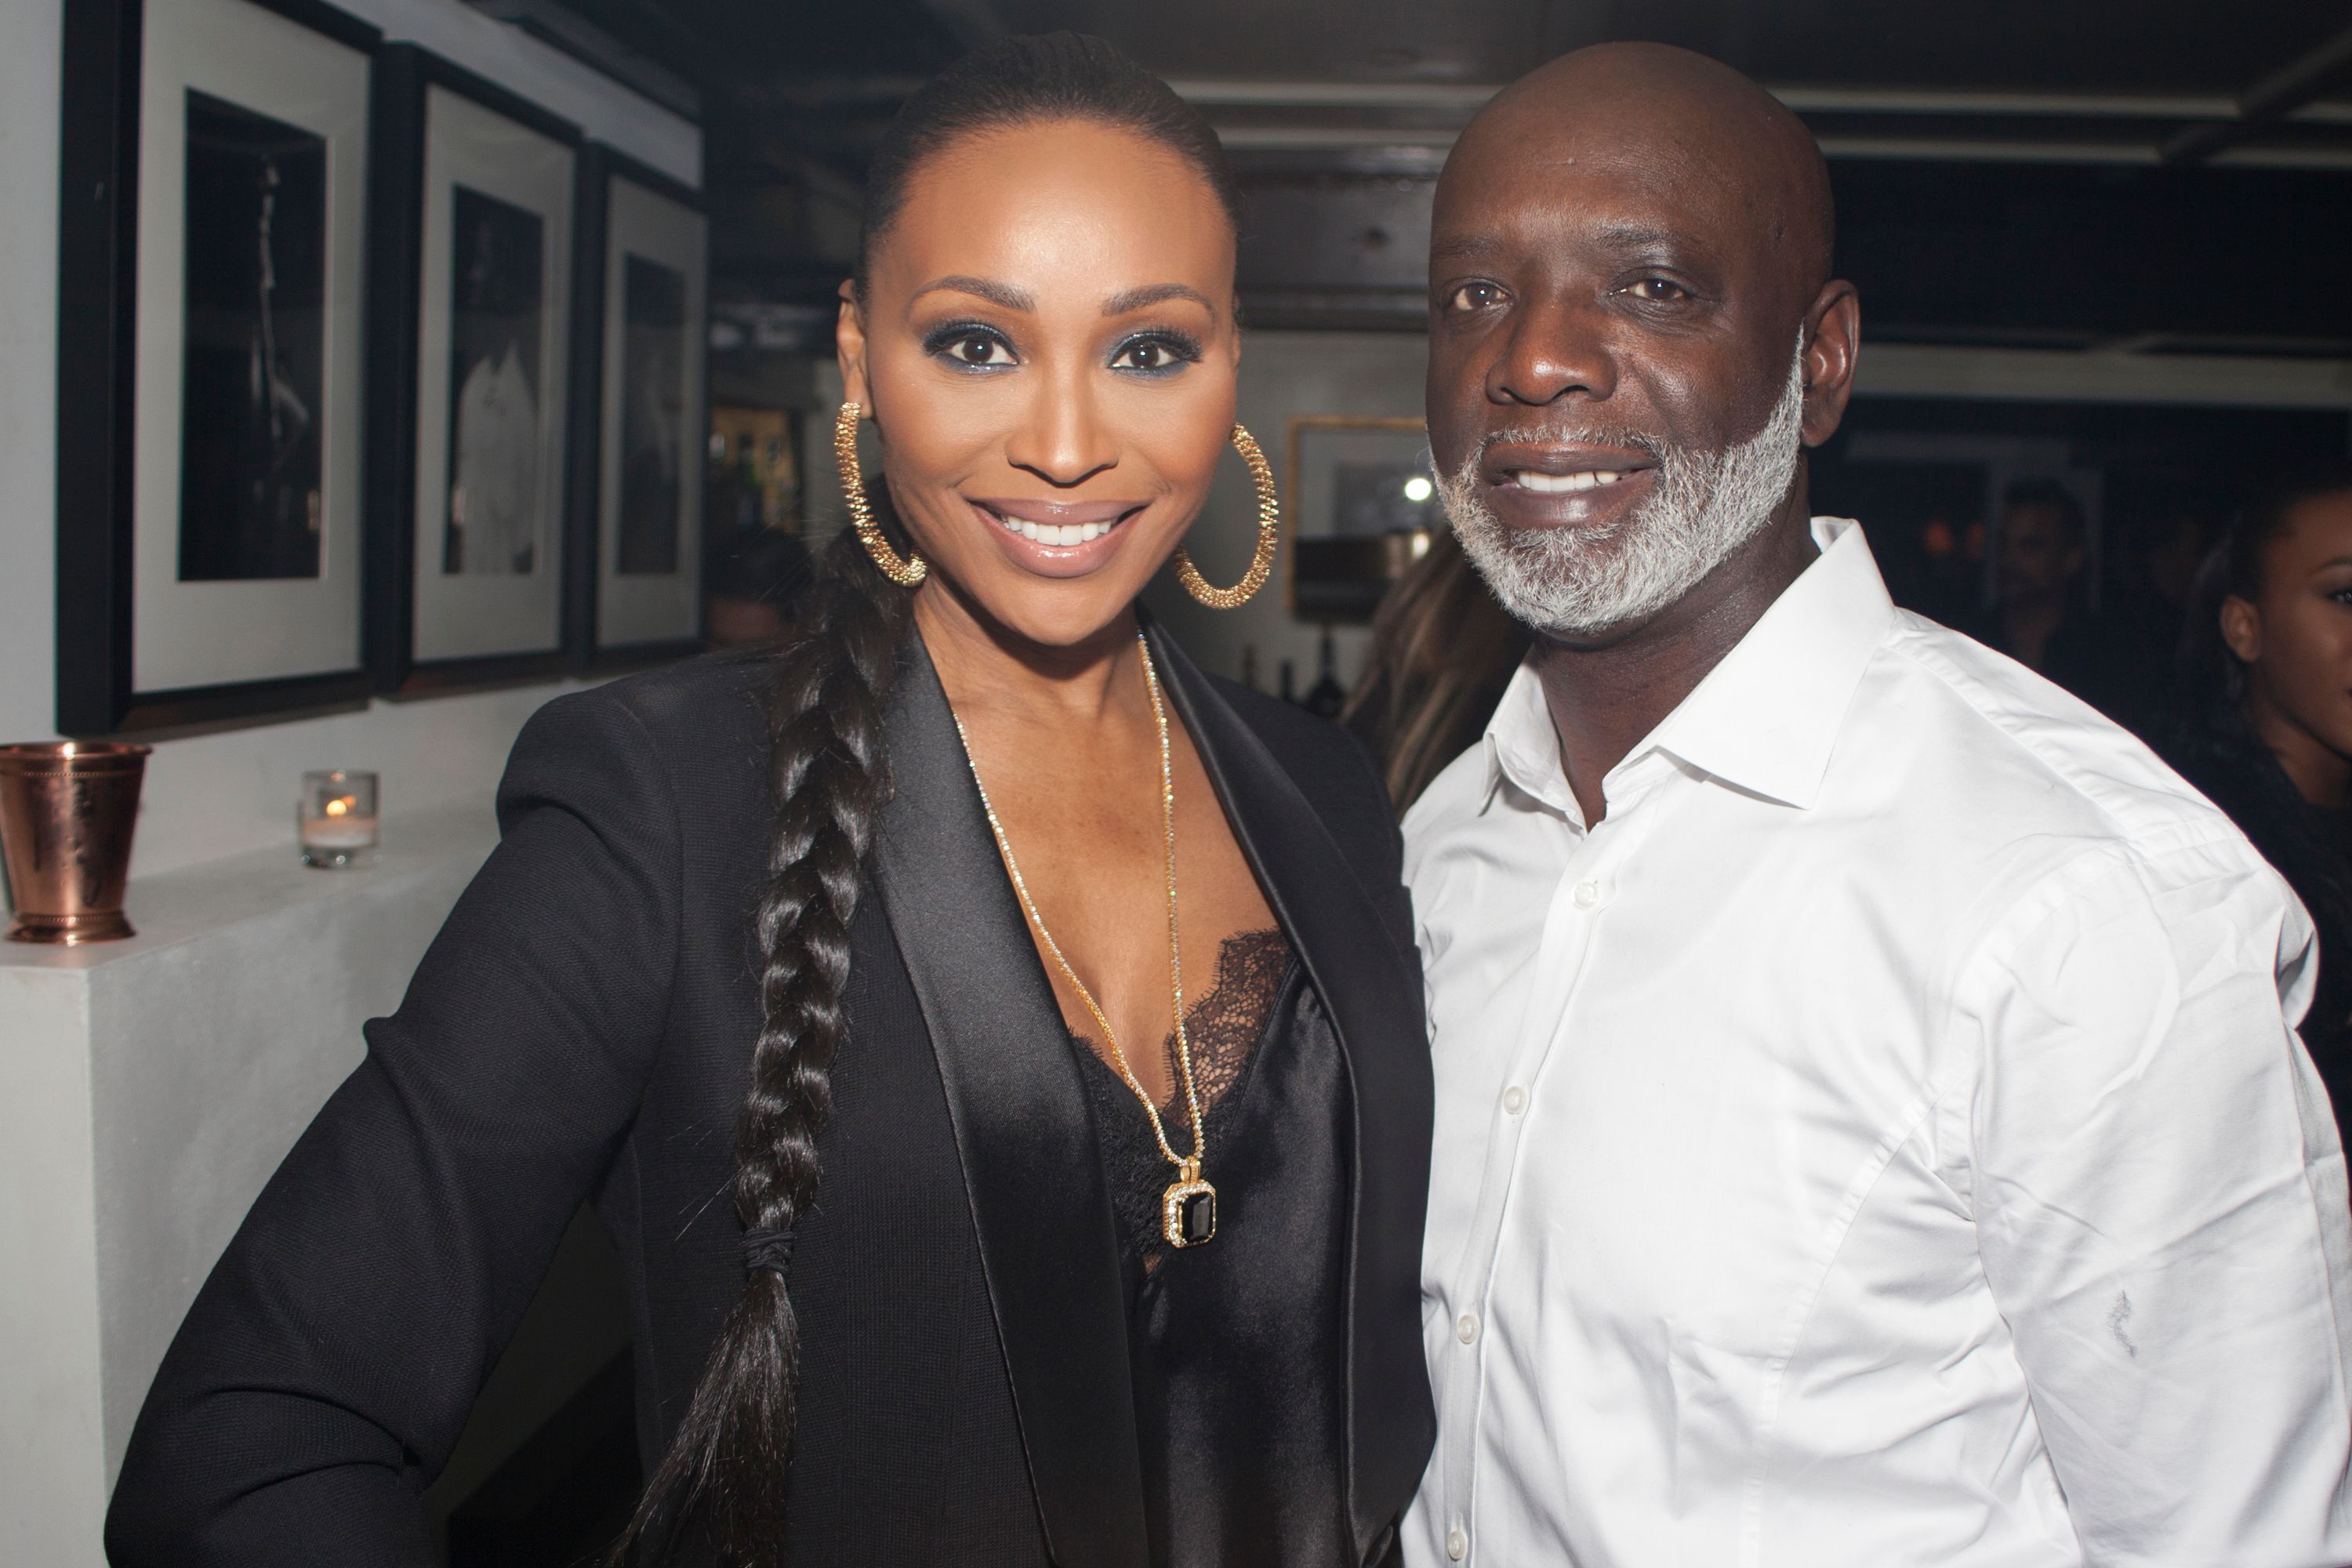 Cynthia Bailey and Peter Thomas at the former's birthday celebration at Omars La Ranita on February 19, 2016 | Photo: Getty Images